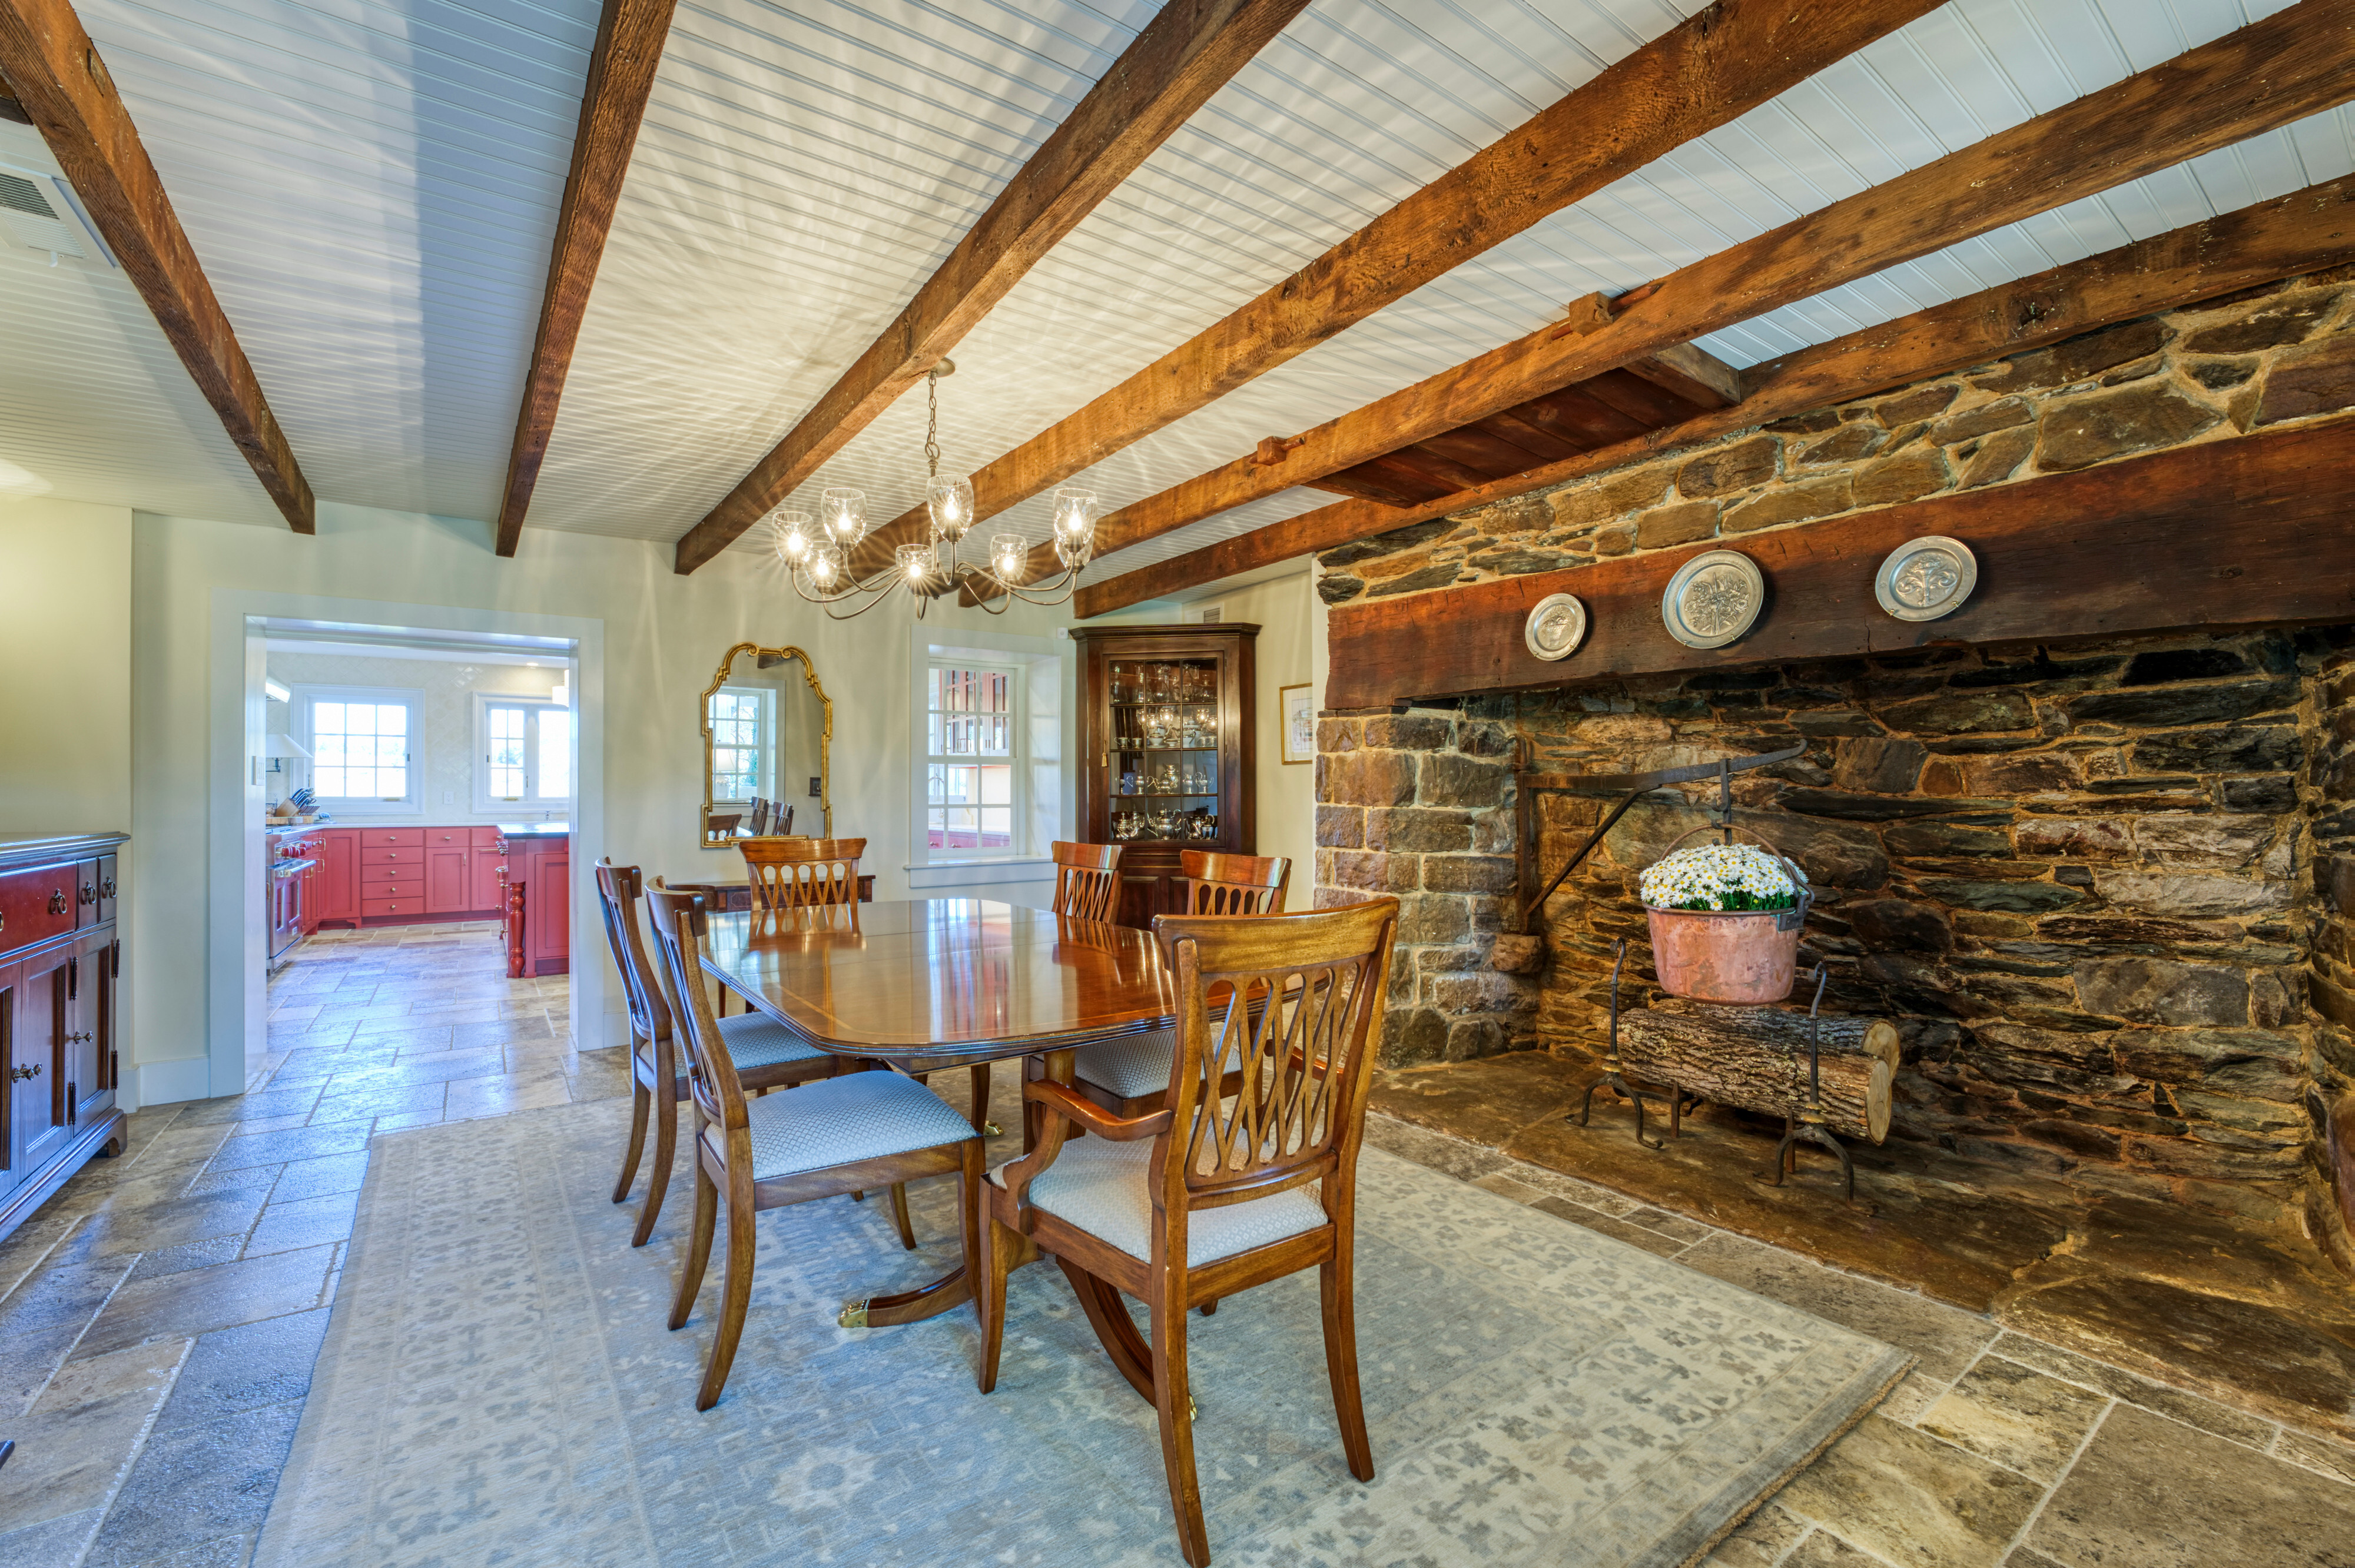 Professional interior photo of main house of Historic Hearthstone Manor: 35428 Appalachian Trail Rd, Round Hill, Virginia - showing formal dining room with wooden dining set, exposed wooden ceiling beams and huge stone fireplace